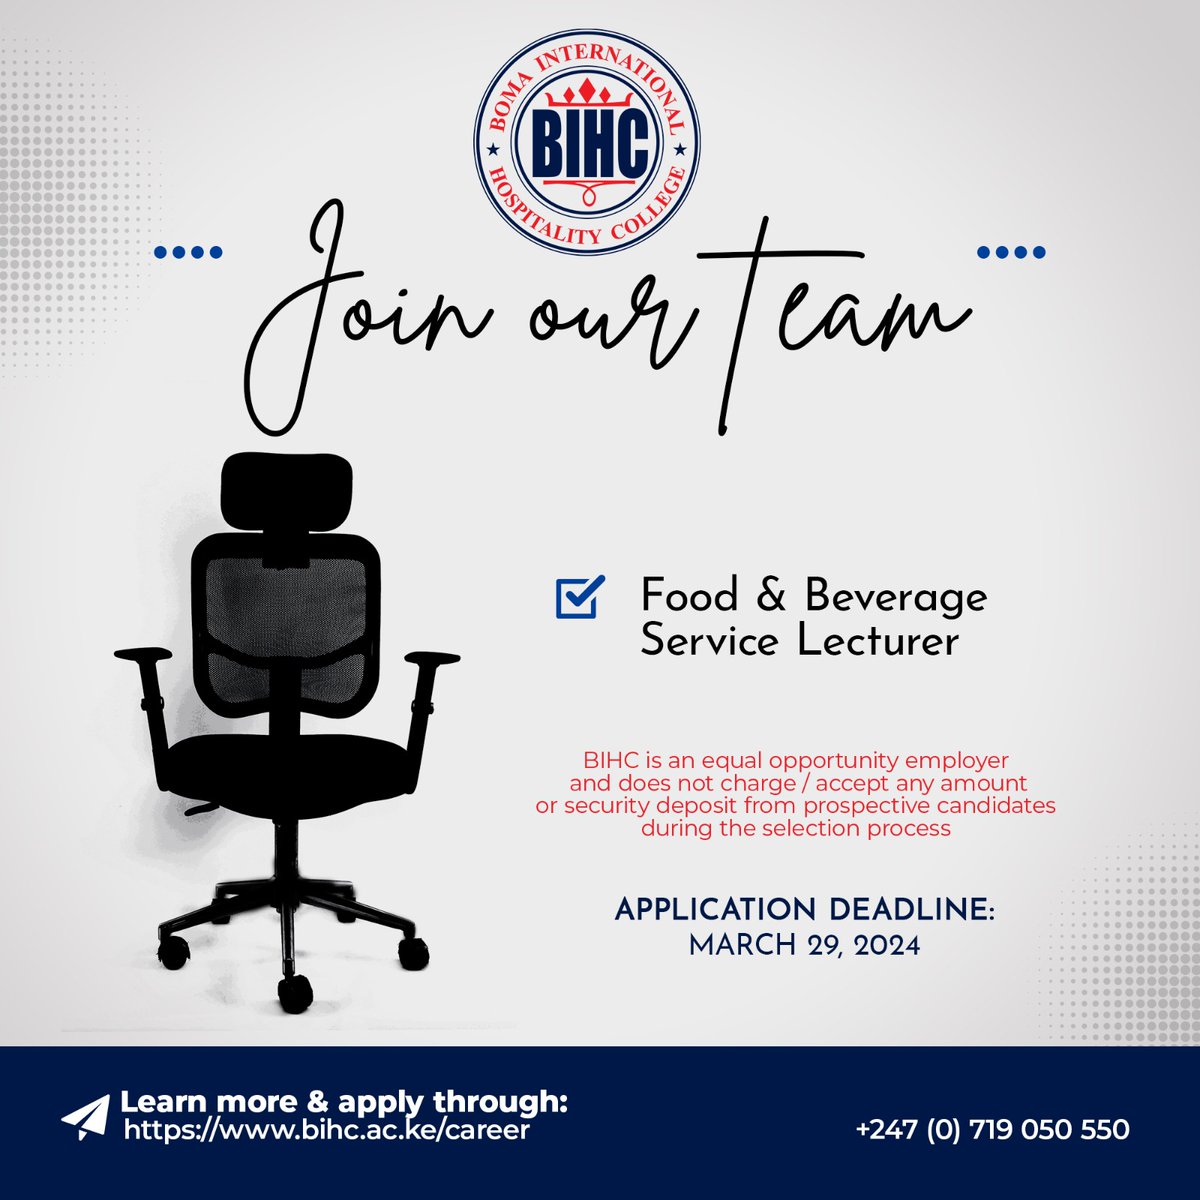 We are hiring a Food & Beverage Service Lecturer. Learn more and apply via bihc.ac.ke/career #ikokazike #BomaCollege